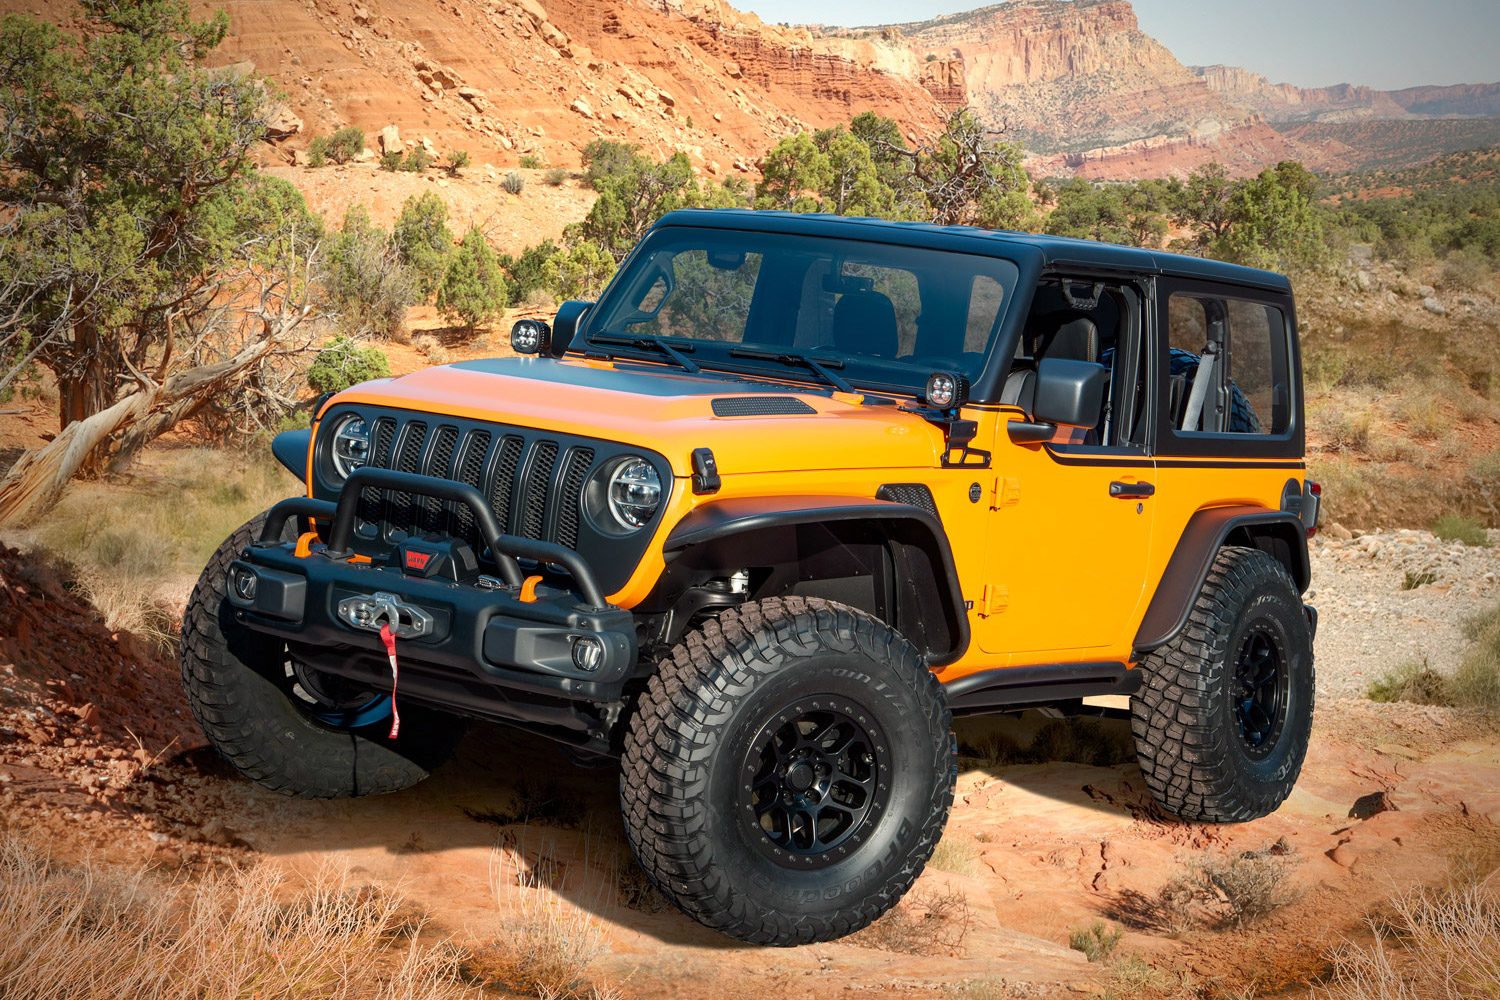 Jeep shows off electric Wrangler concept - car and motoring news by